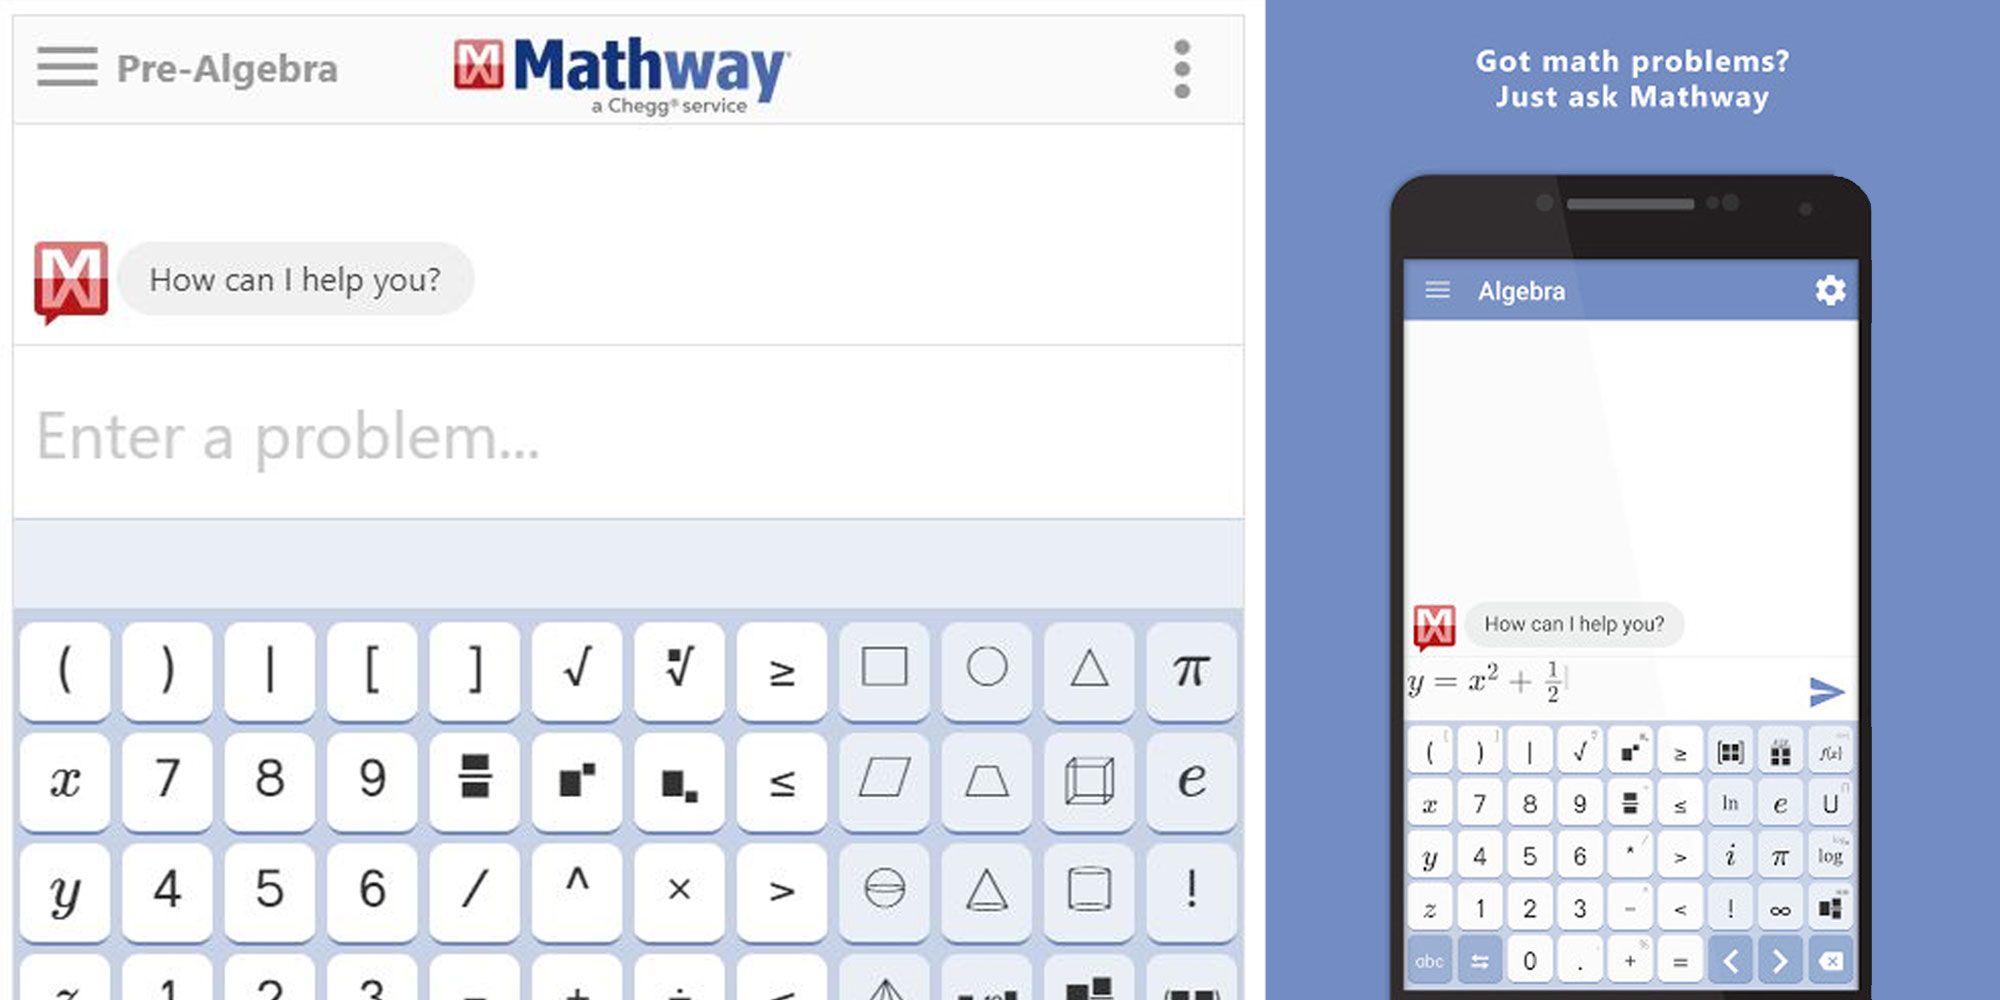 An image of the Mathway app layout